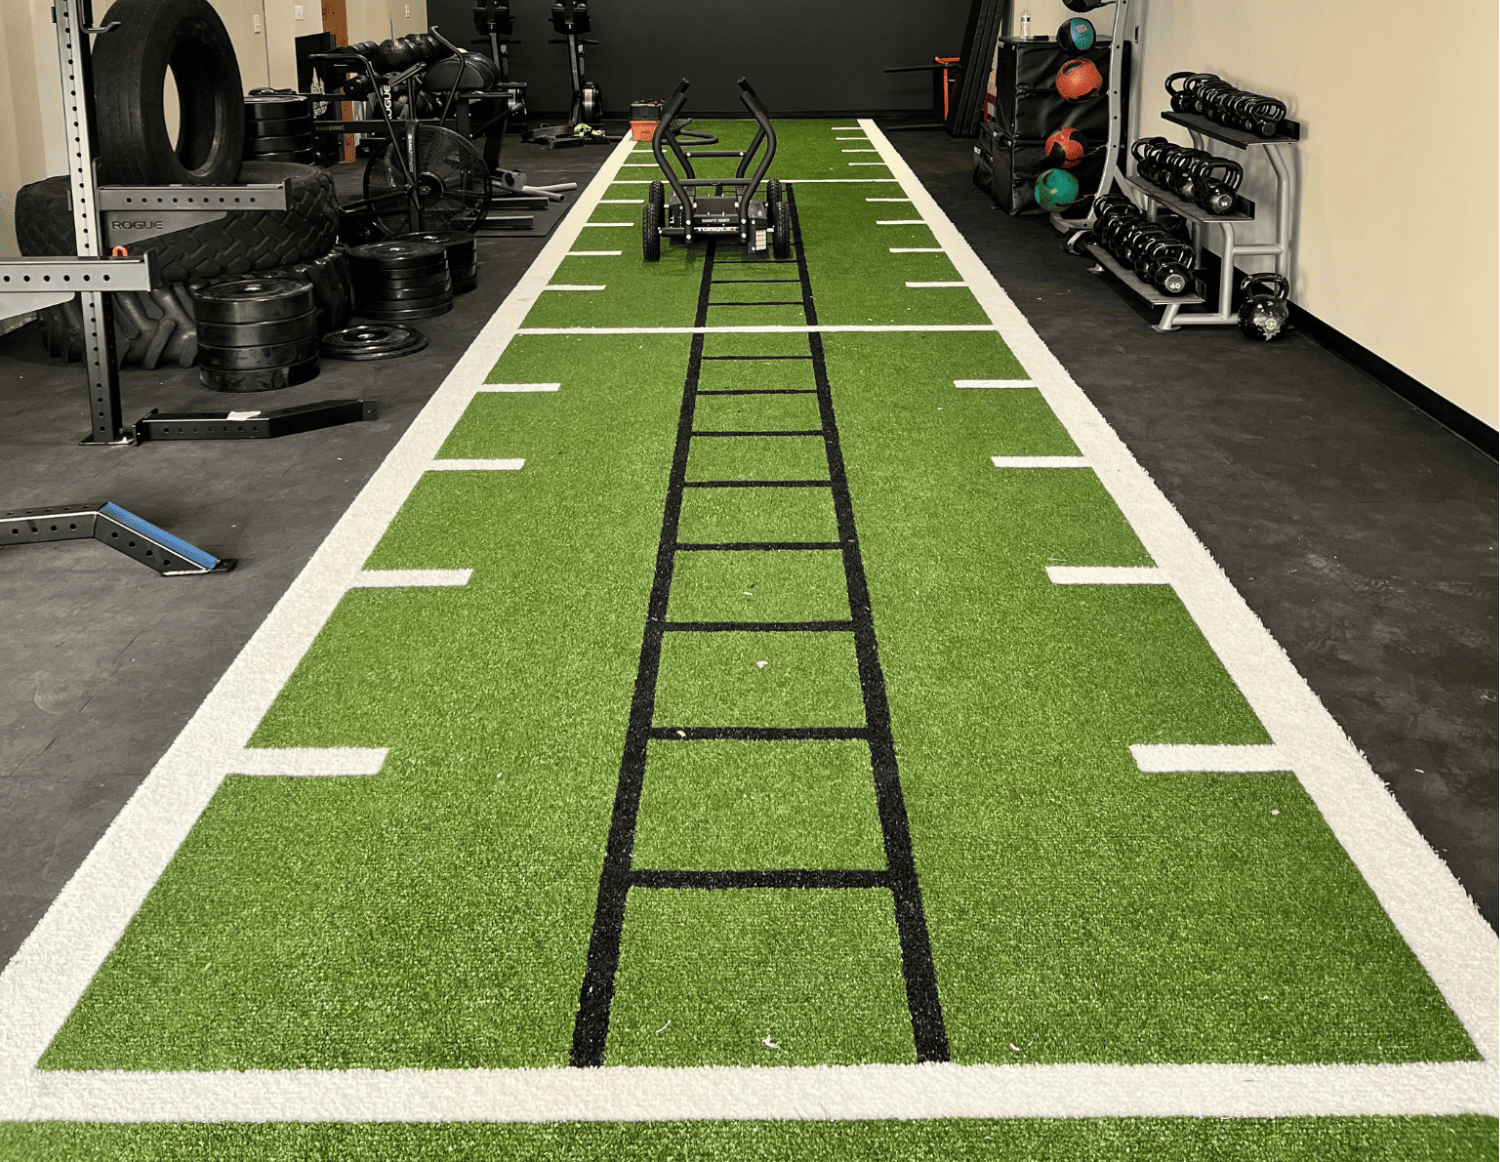 Read more about the article Functional Training on an Indoor Turf Area